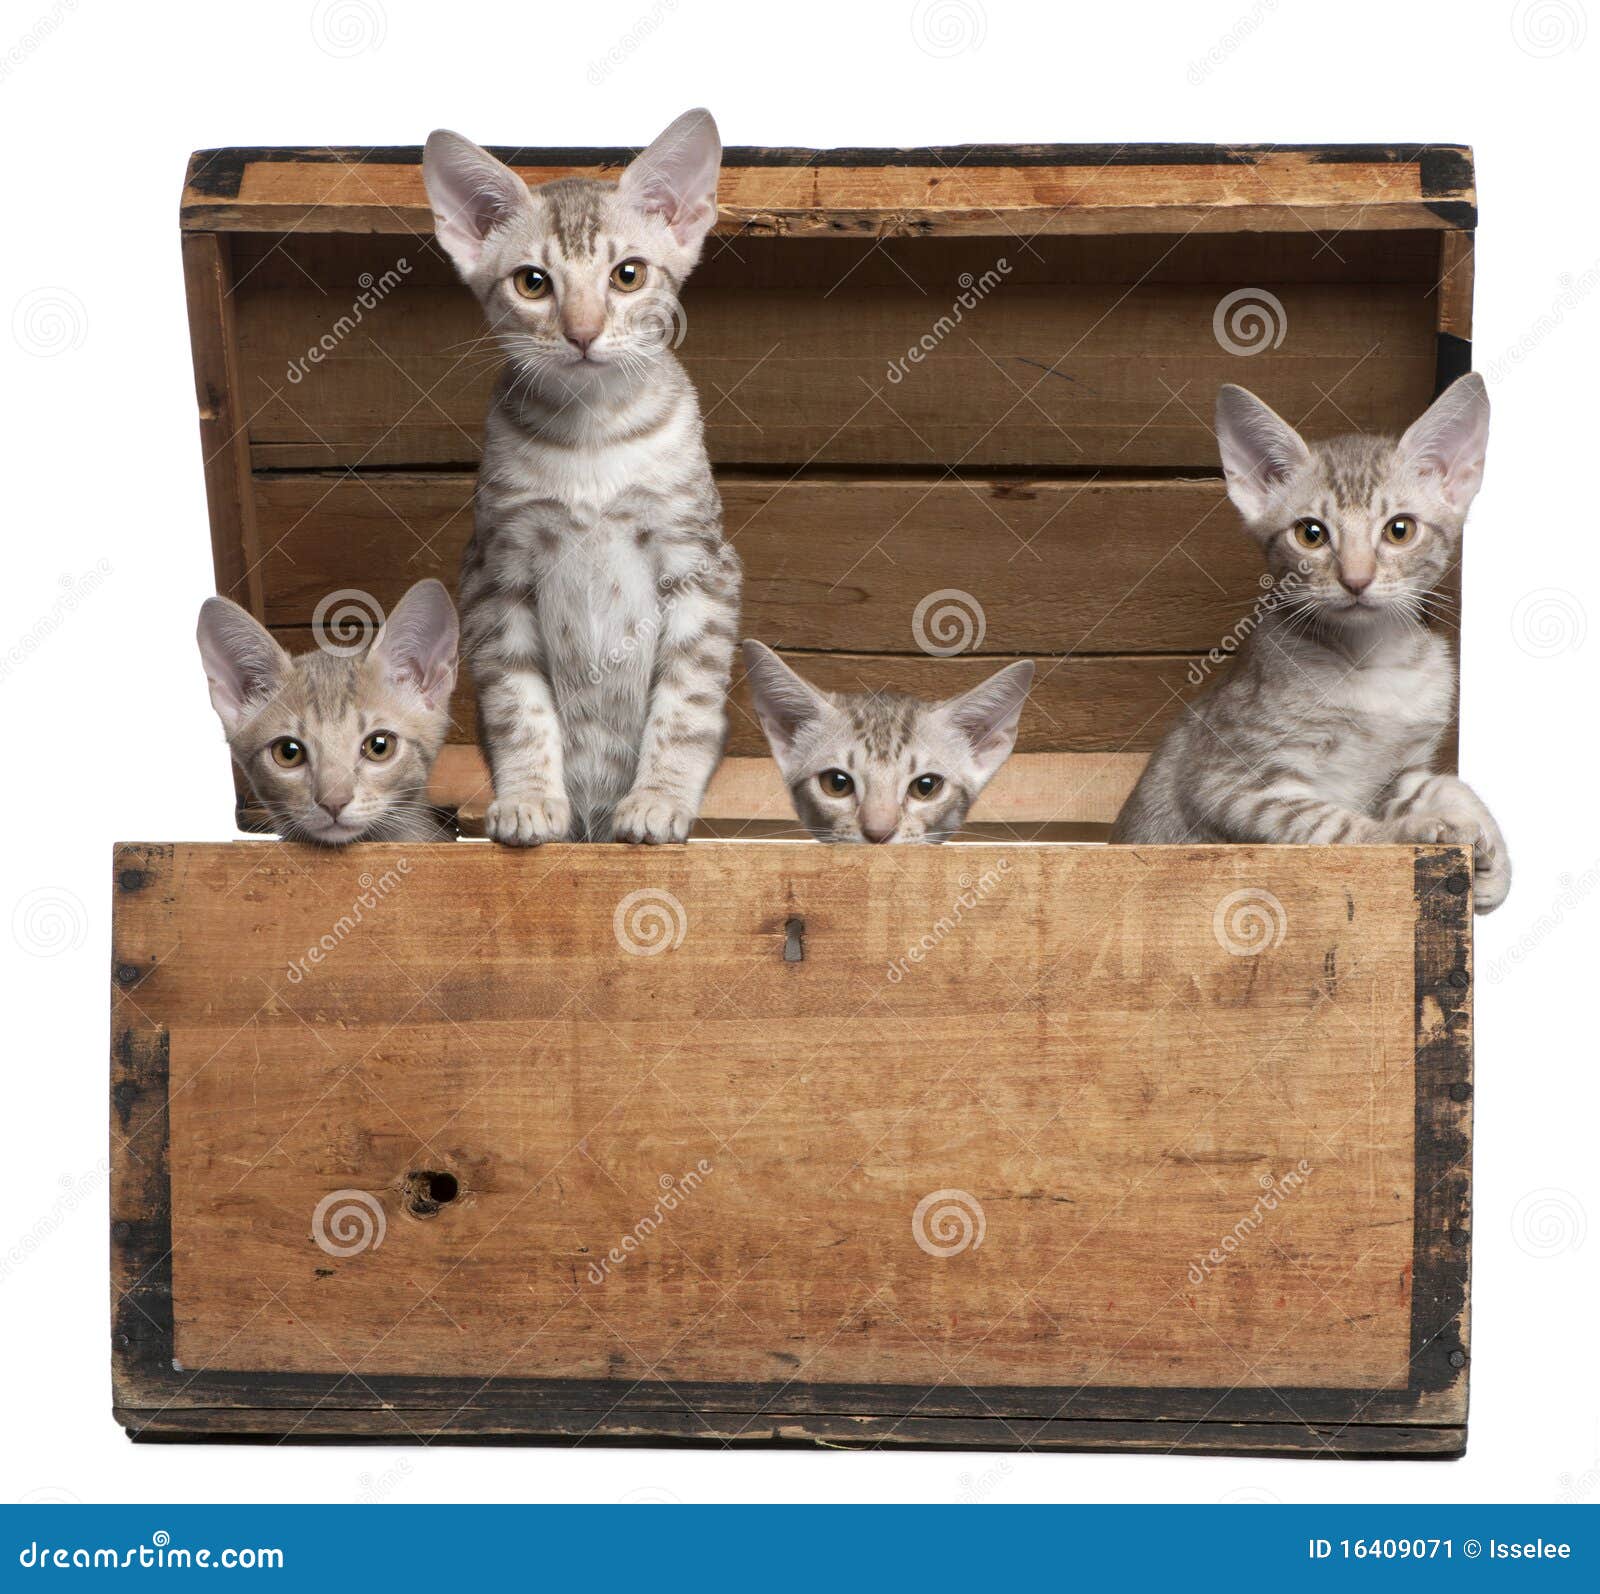 ocicat kittens, 13 weeks old, emerging from a box